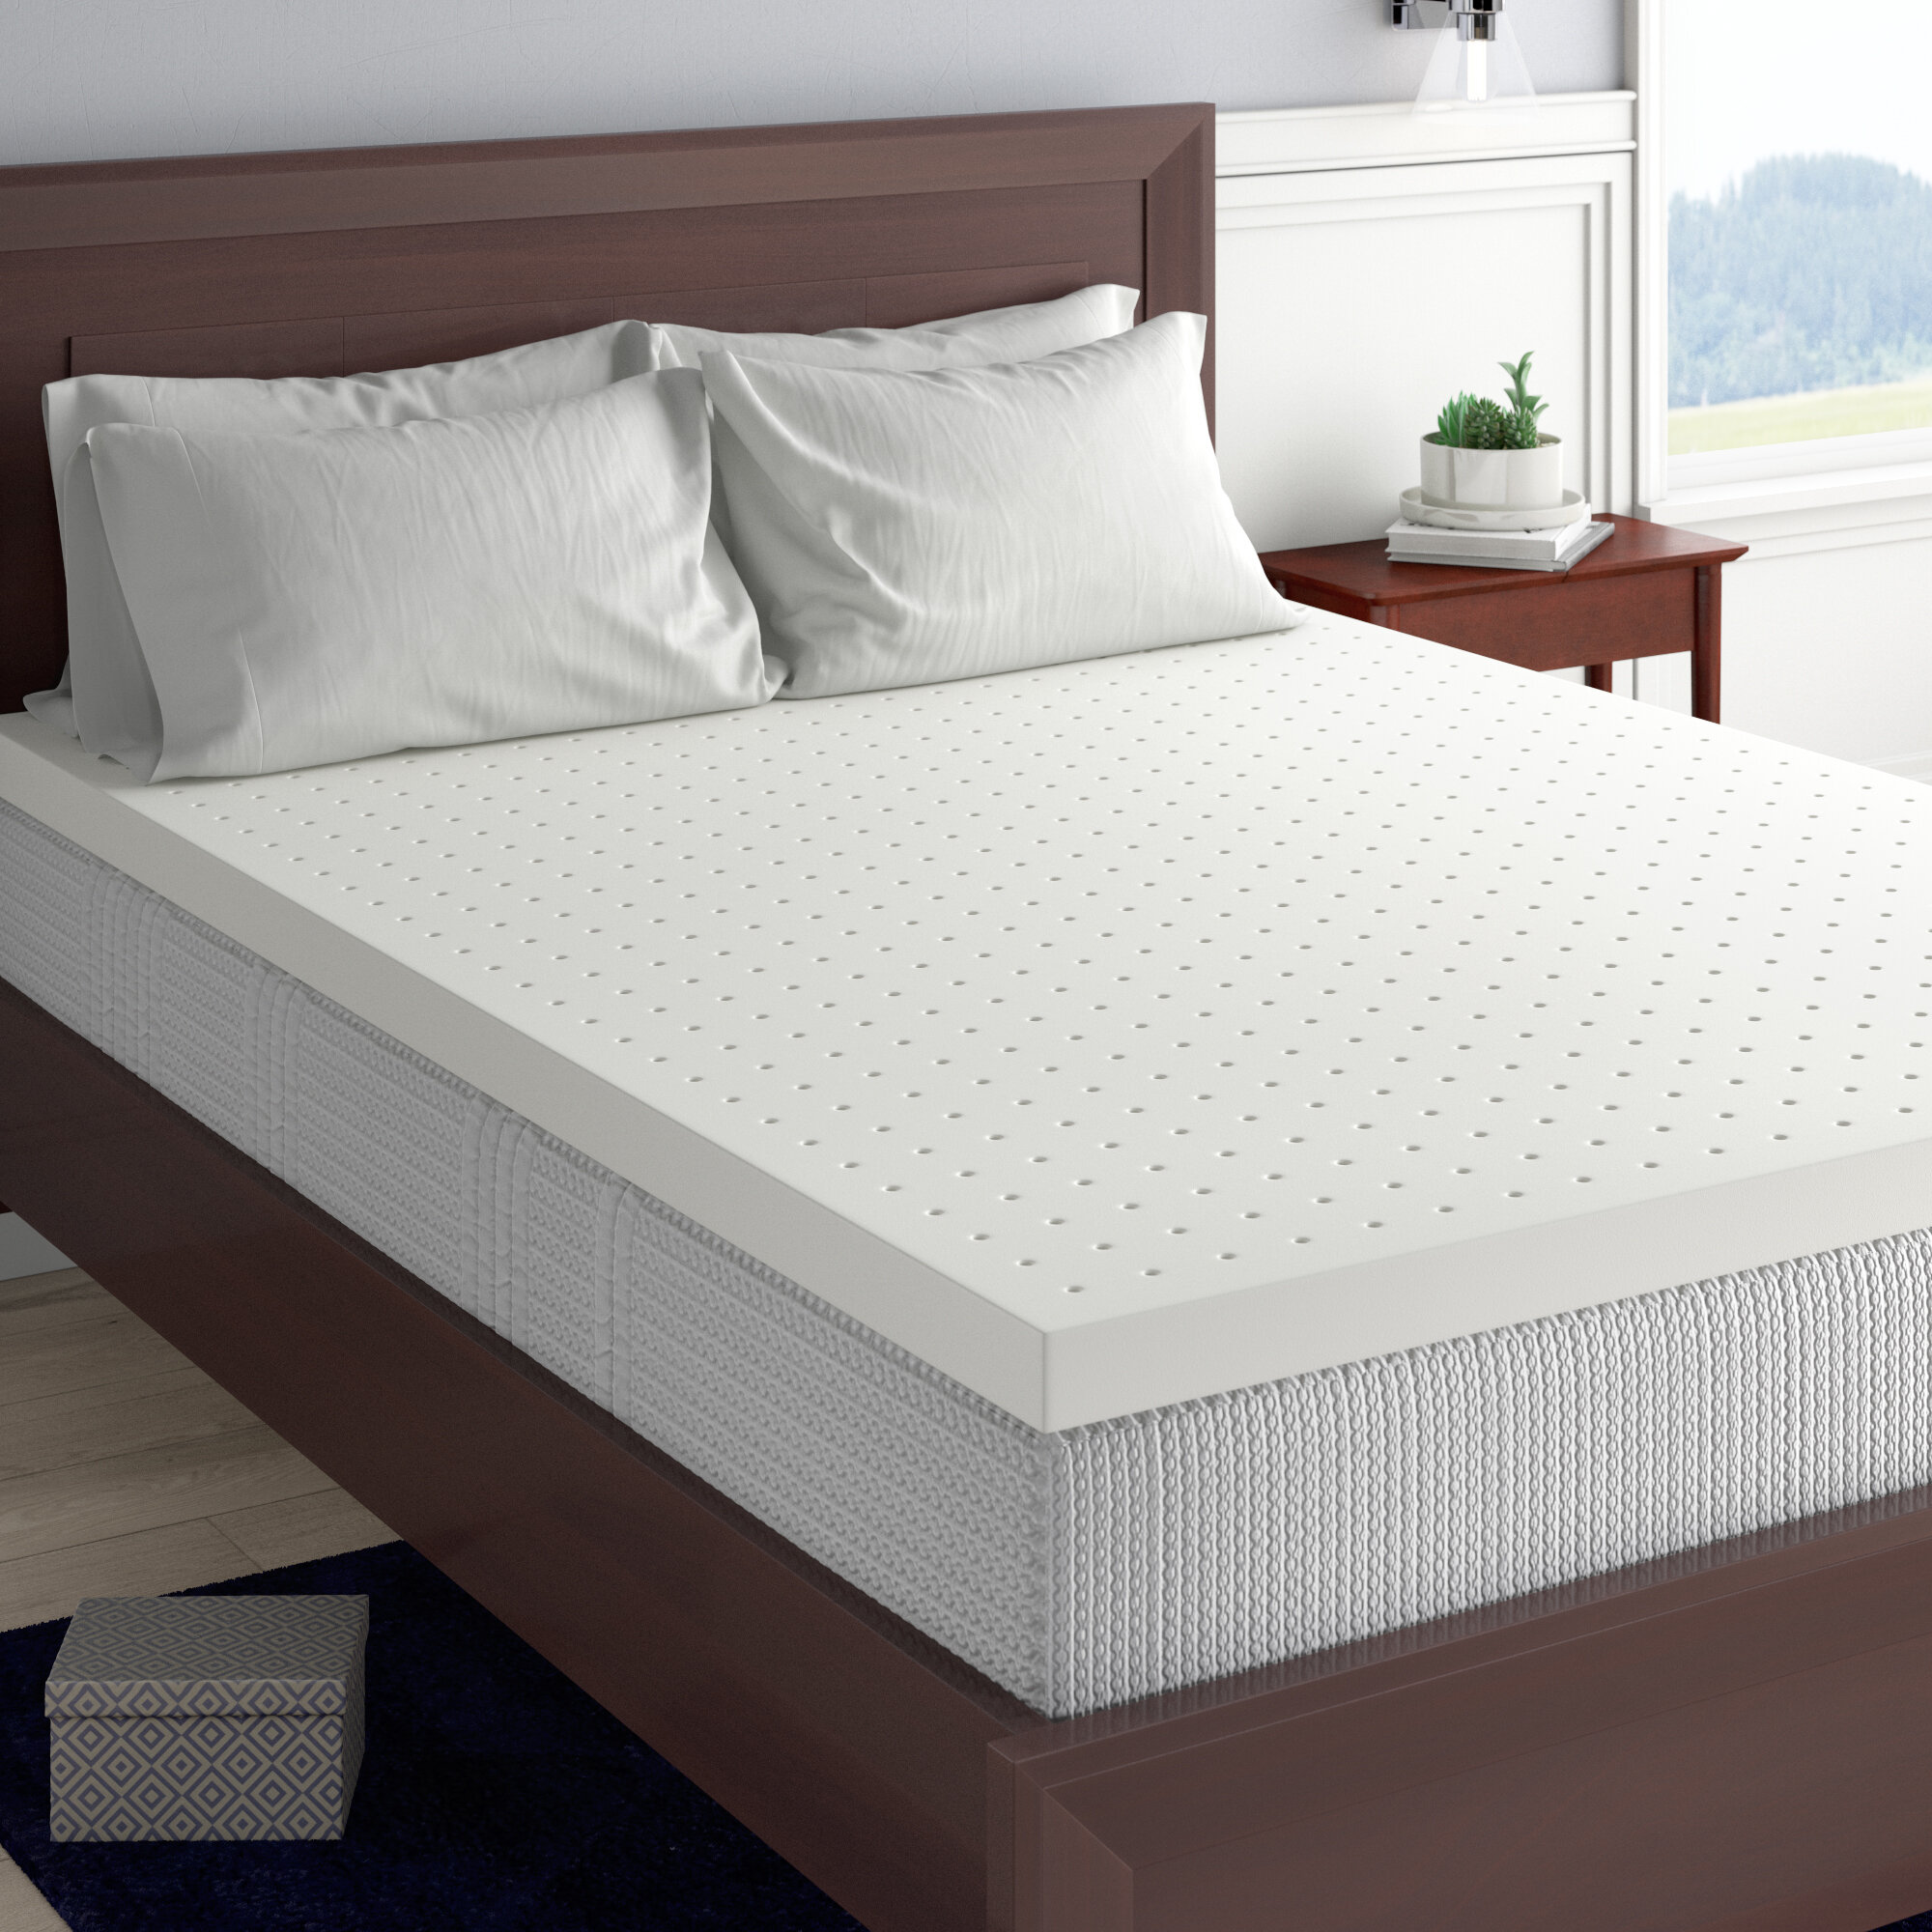 3" FULL SIZE COMFORT SELECT 2.5 FIRM FOAM MATTRESS PAD BED TOPPER 